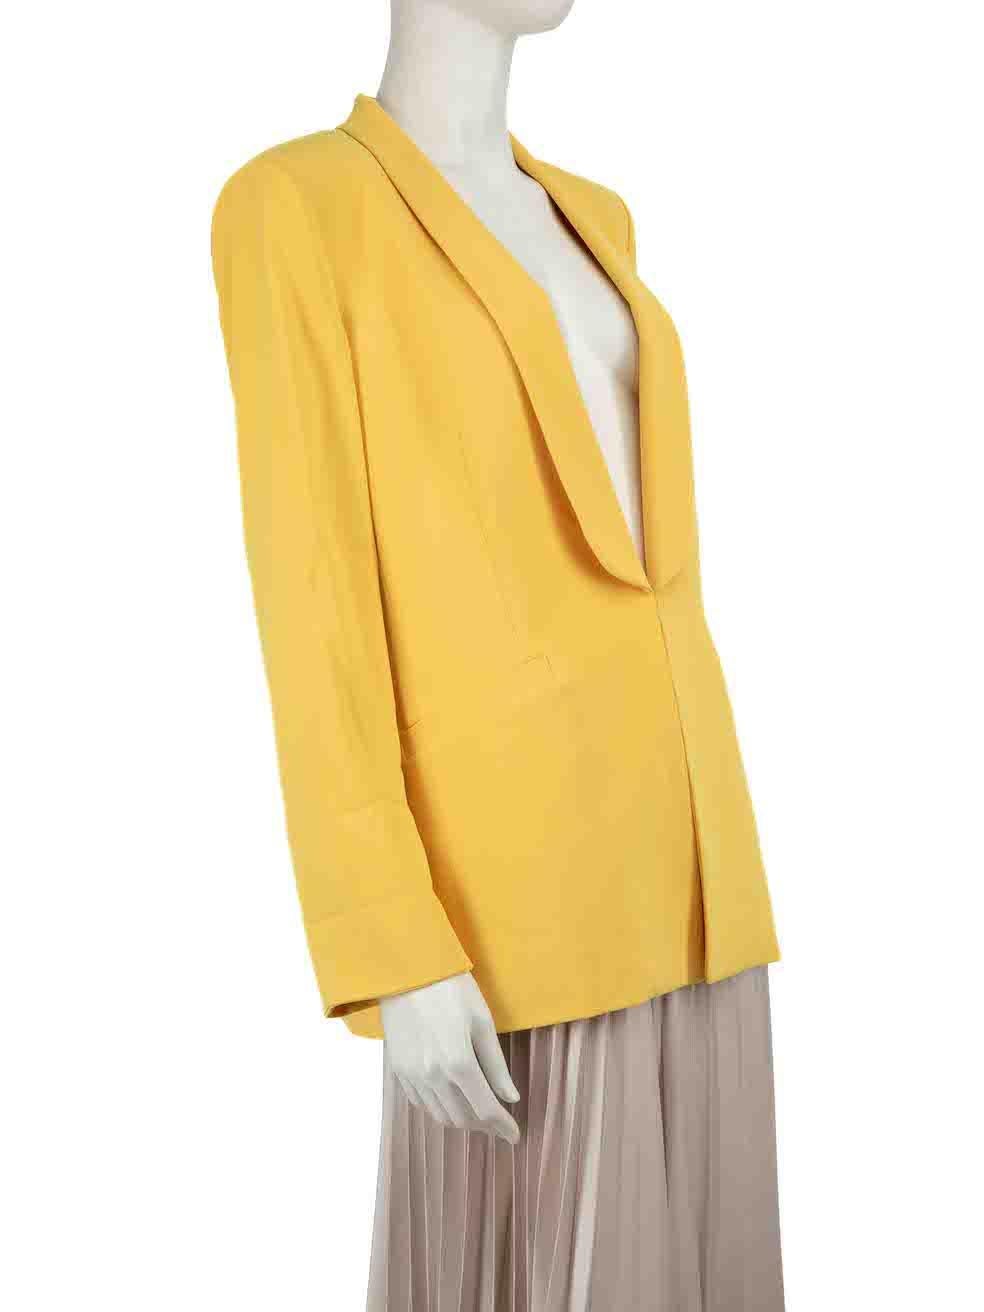 CONDITION is Never worn, with tags. No visible wear to blazer is evident on this new Alice + Olivia designer resale item.
 
 
 
 Details
 
 
 Yellow
 
 Polyester
 
 Blazer
 
 Single breasted
 
 Hook fastening
 
 Long sleeves
 
 2x Front pockets
 
 
